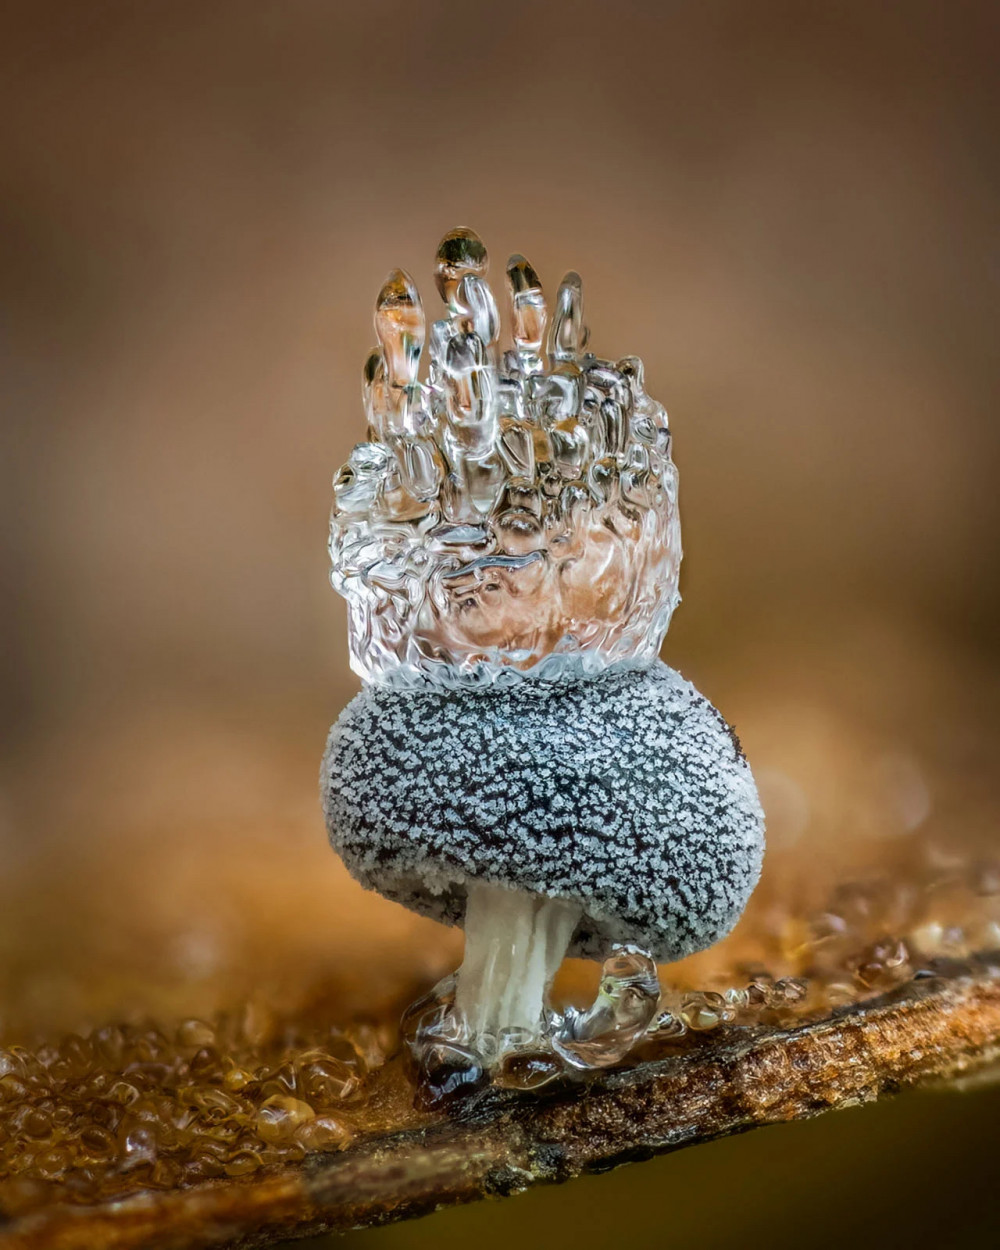 FUNGI-1st-C2A9-Barry-Webb-The-Ice-Crown-